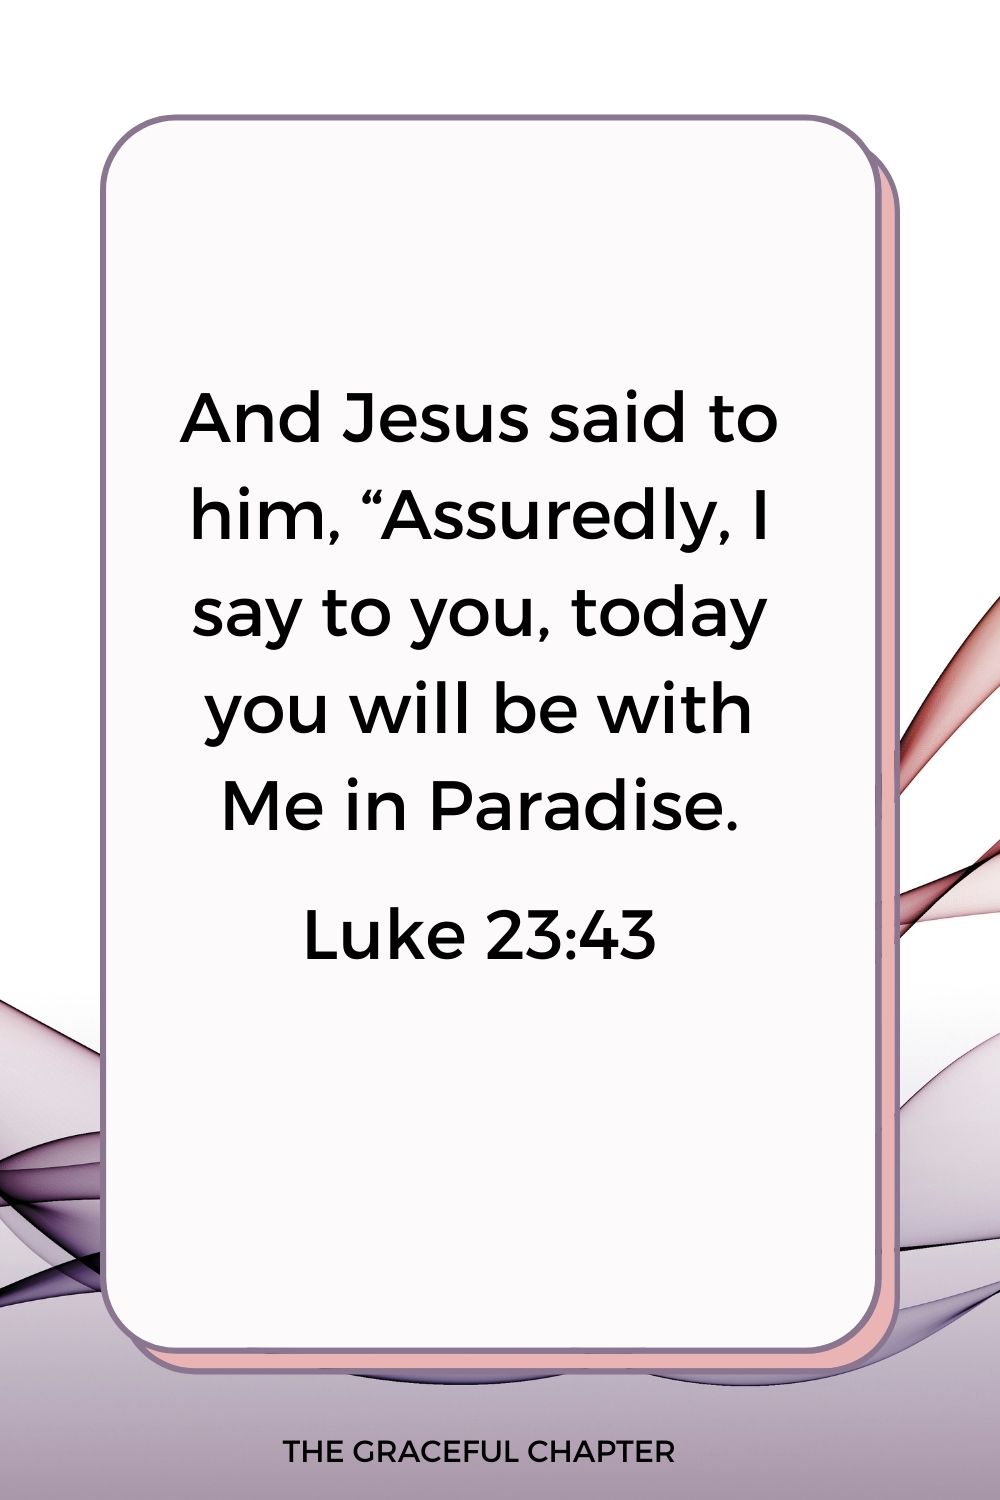 And Jesus said to him, “Assuredly, I say to you, today you will be with Me in Paradise.” Luke 23:43